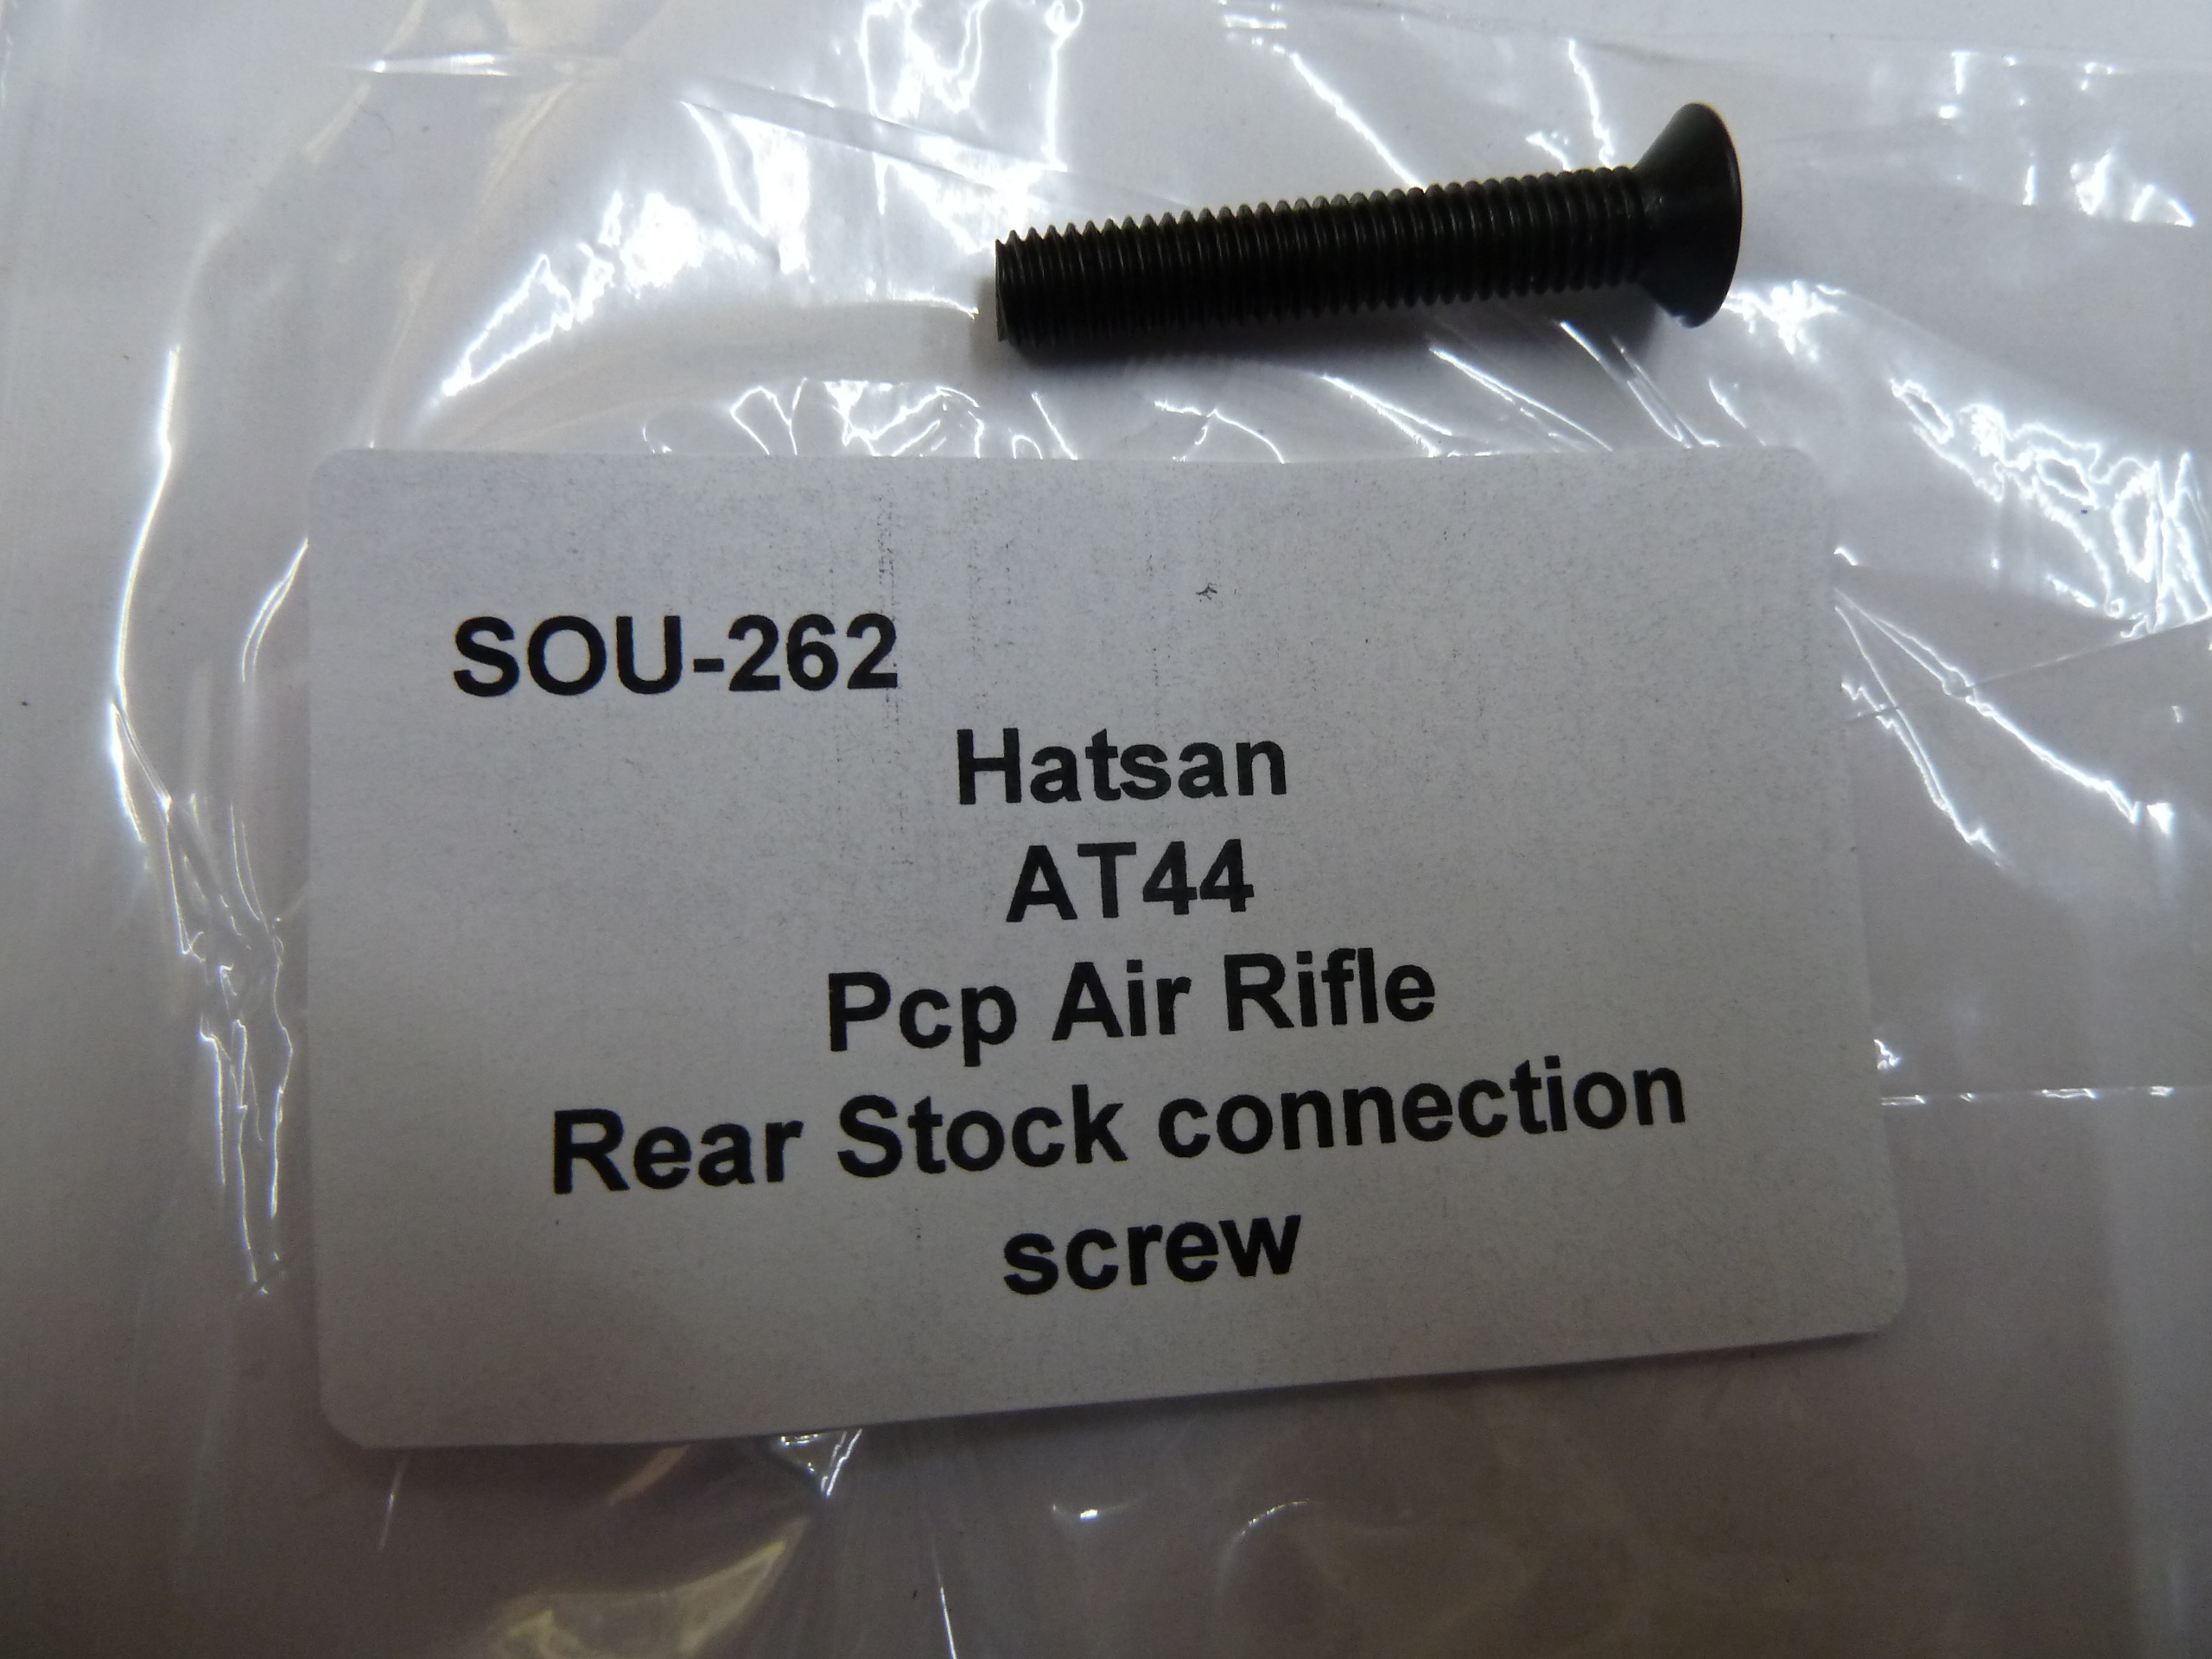 Hatsan AT44 rear stock connection screw